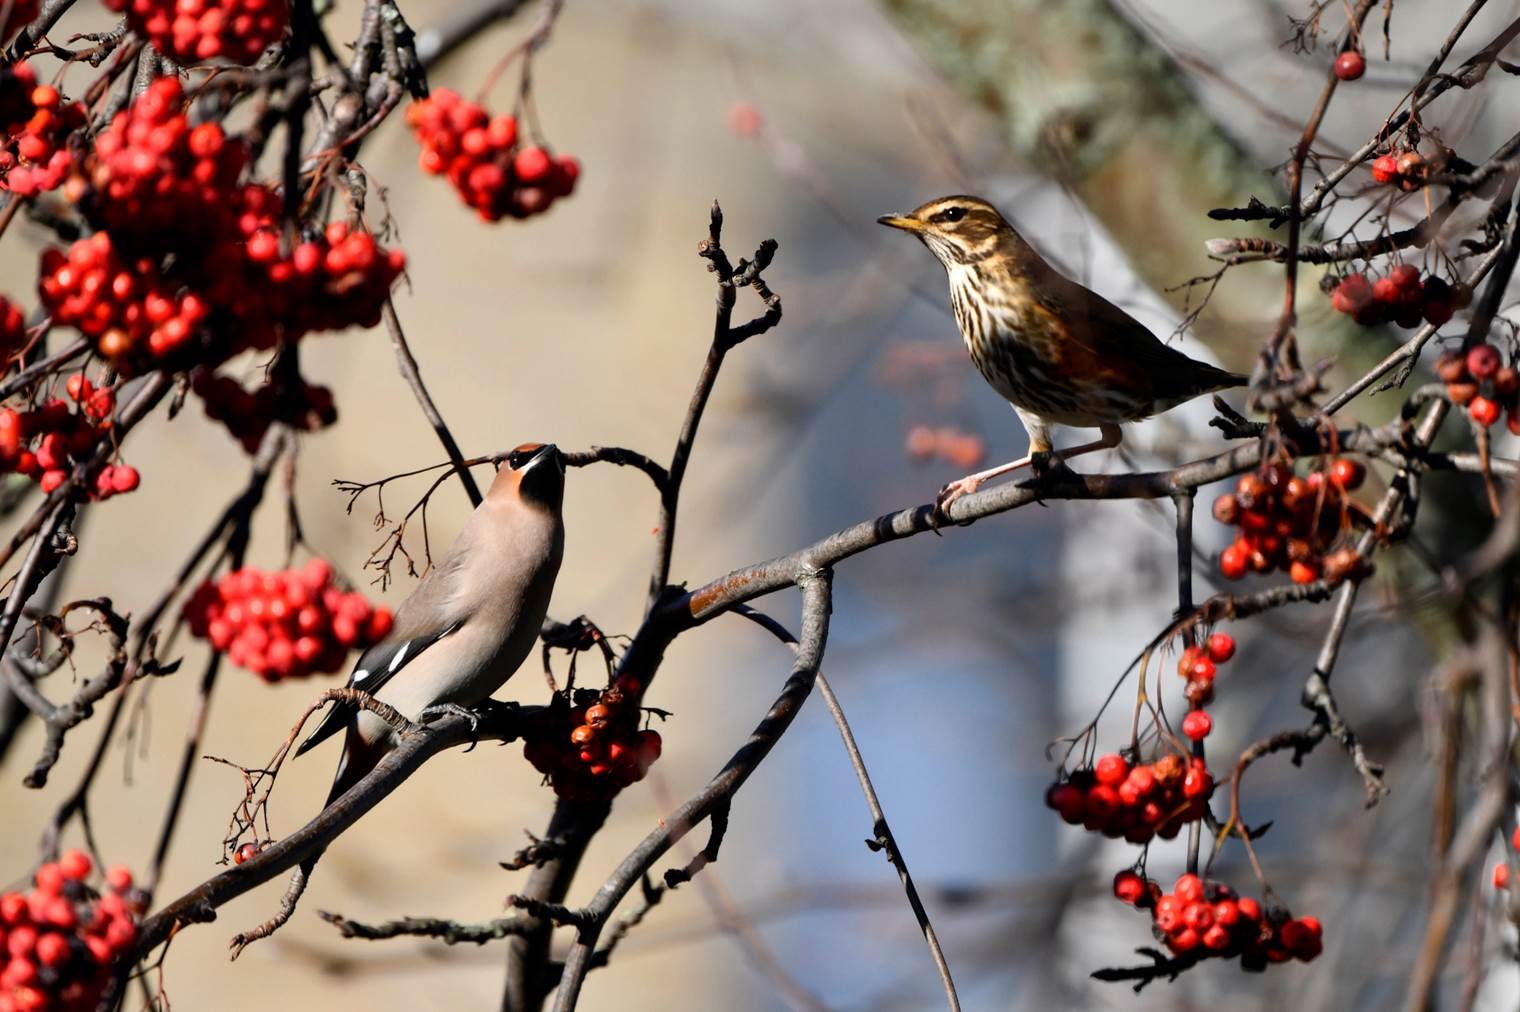 A bird on a branch with berries

Description automatically generated